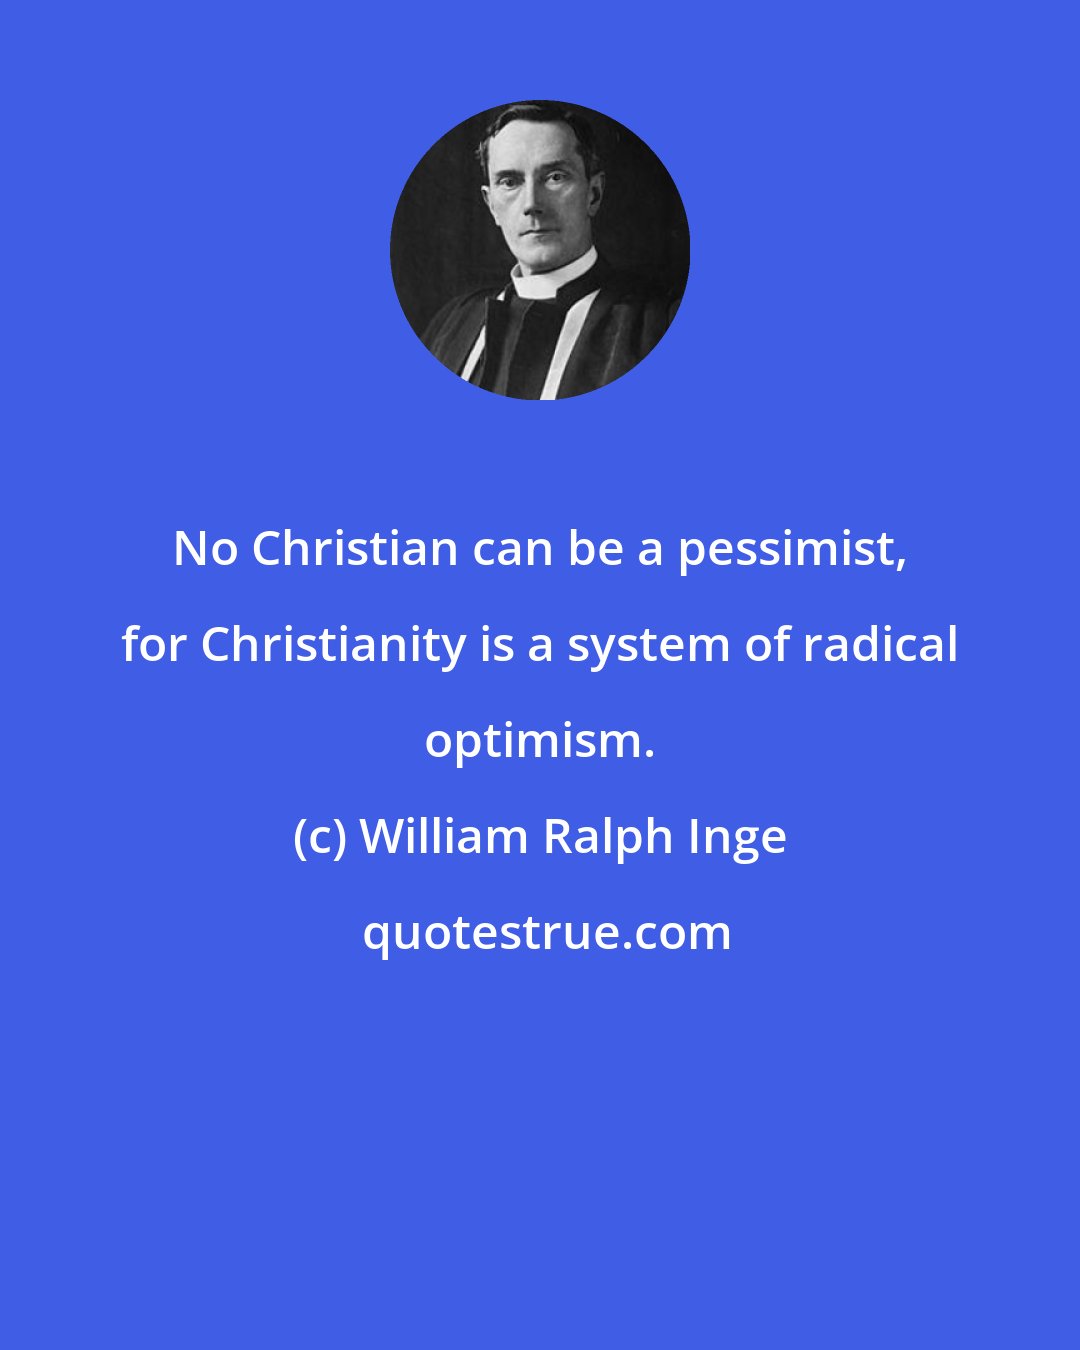 William Ralph Inge: No Christian can be a pessimist, for Christianity is a system of radical optimism.